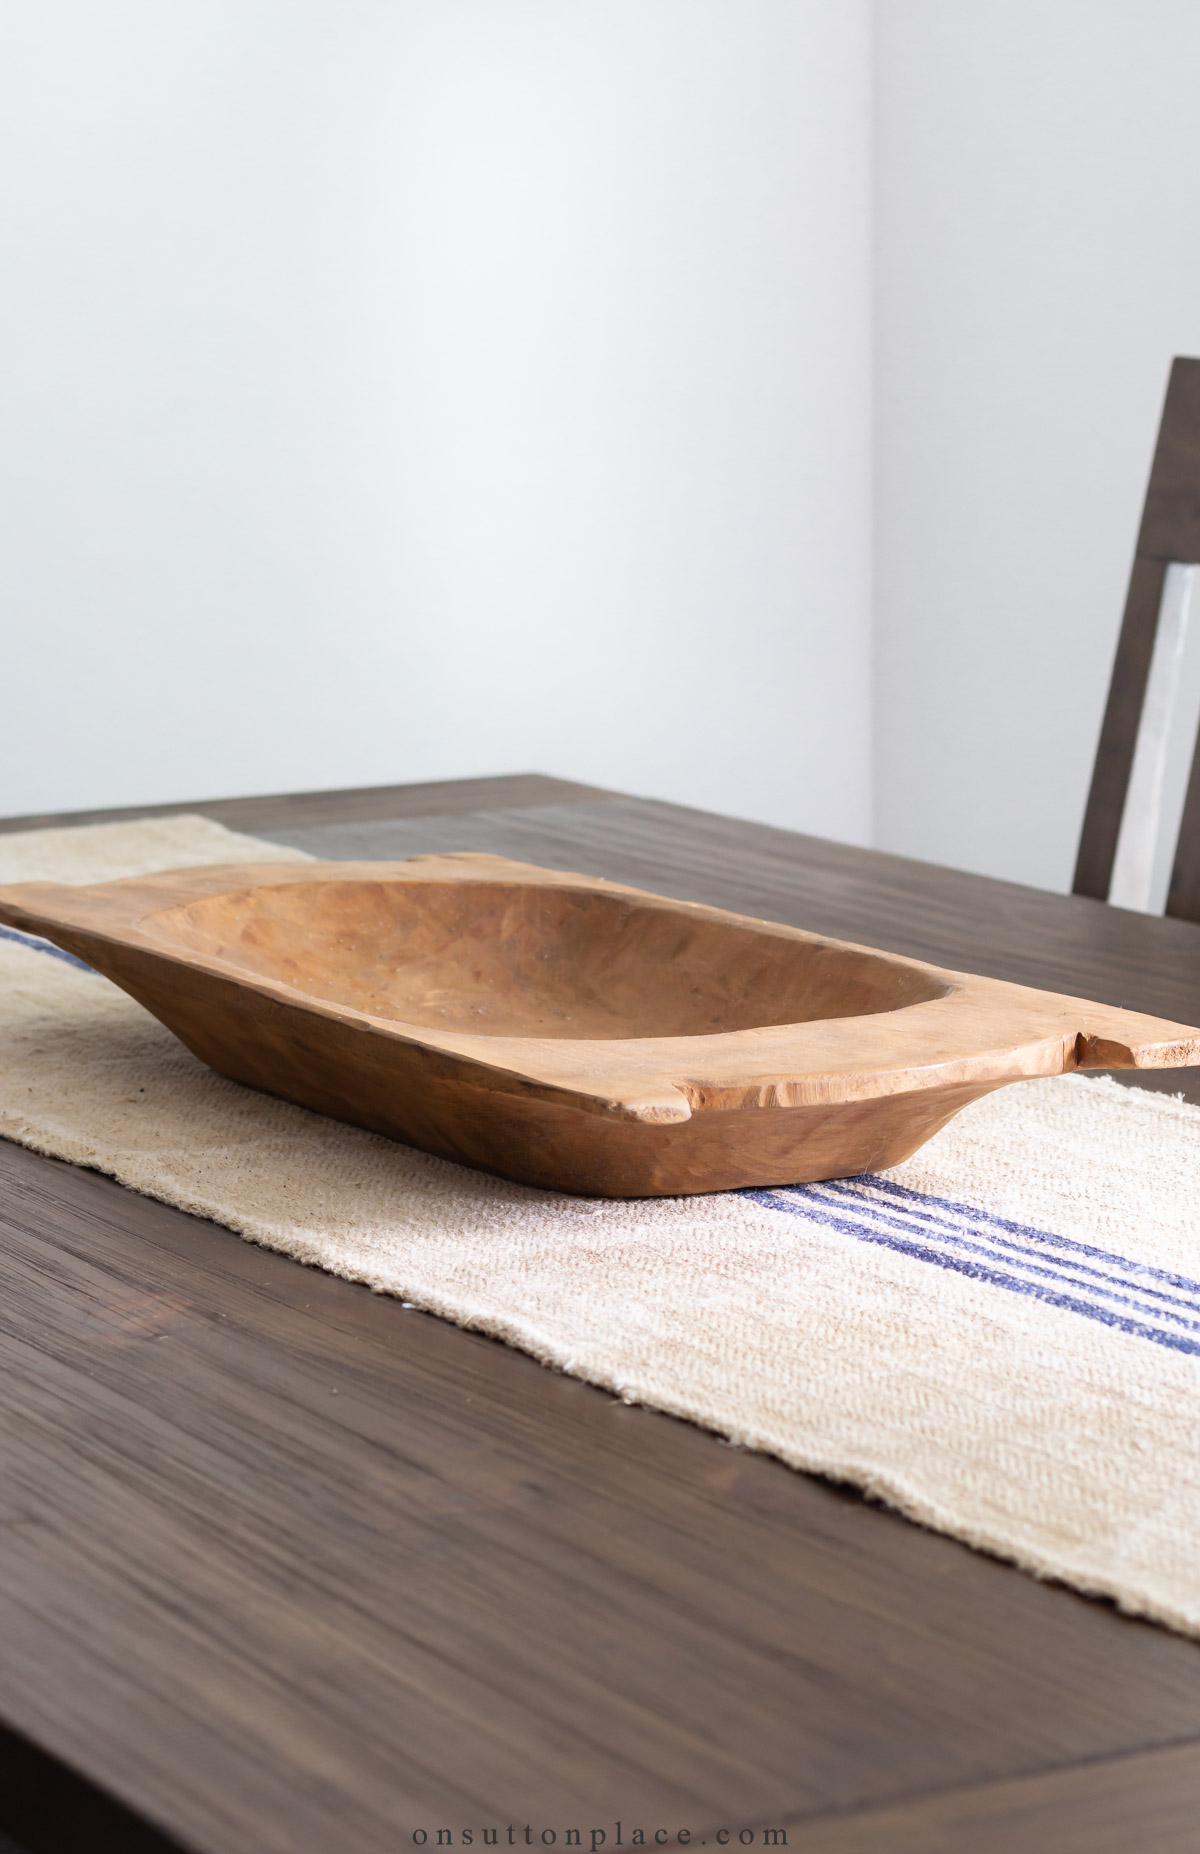 Dough Bowl: What You Need to Know About Owning & Decorating Them!